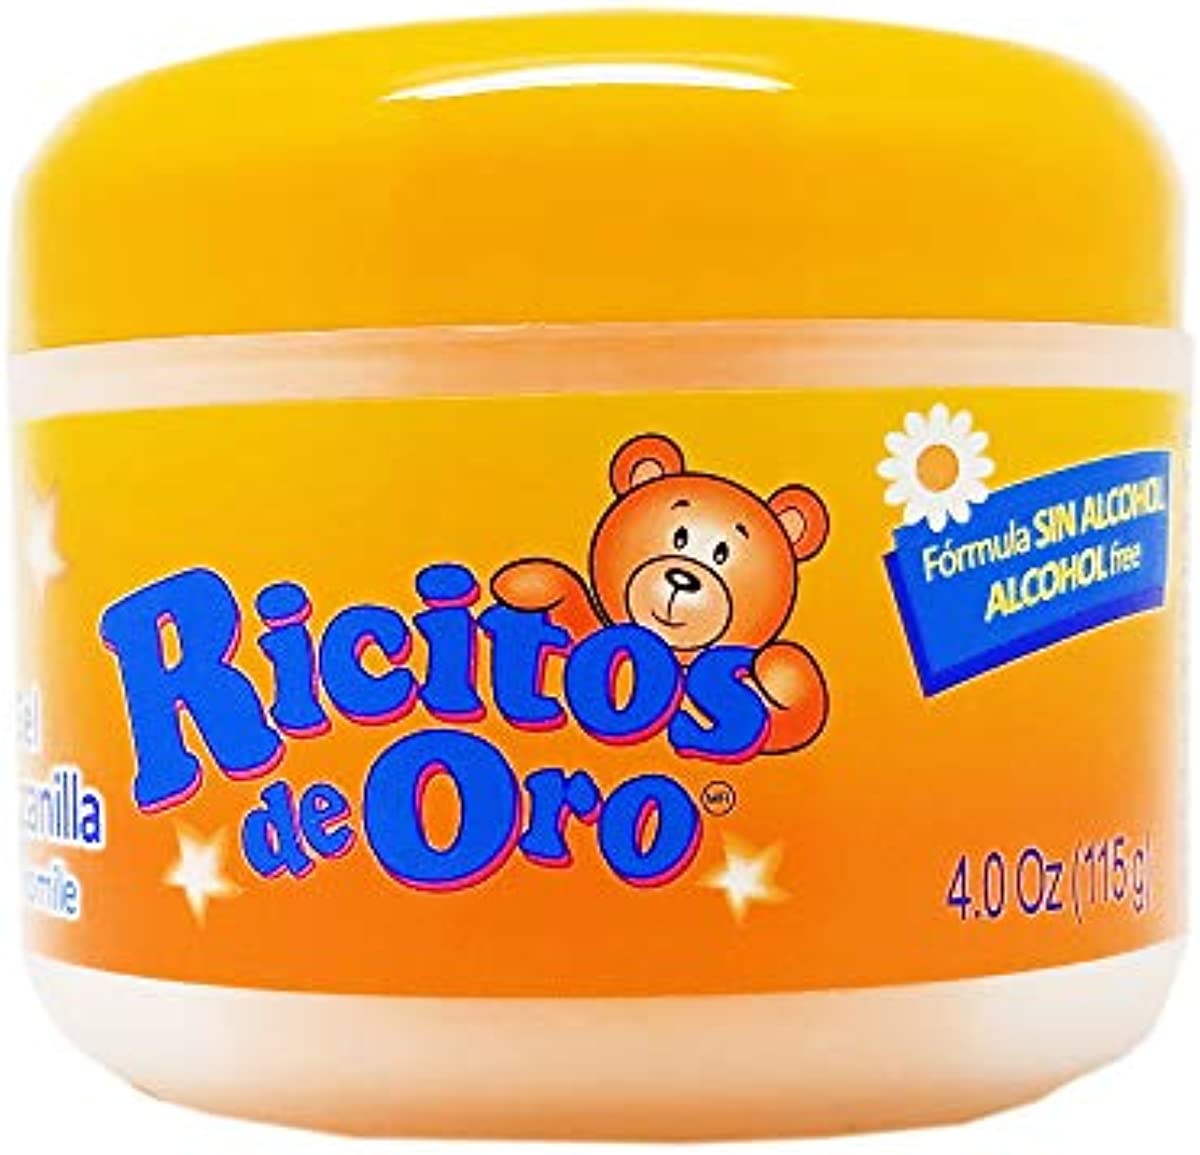 Ricitos De Oro Chamomile Baby Styling Gel. Natural. Alcohol Free, Not Greasy or Sticky. For Daily Use. 4.0 Fl Oz / 115 gr. Pack of 2